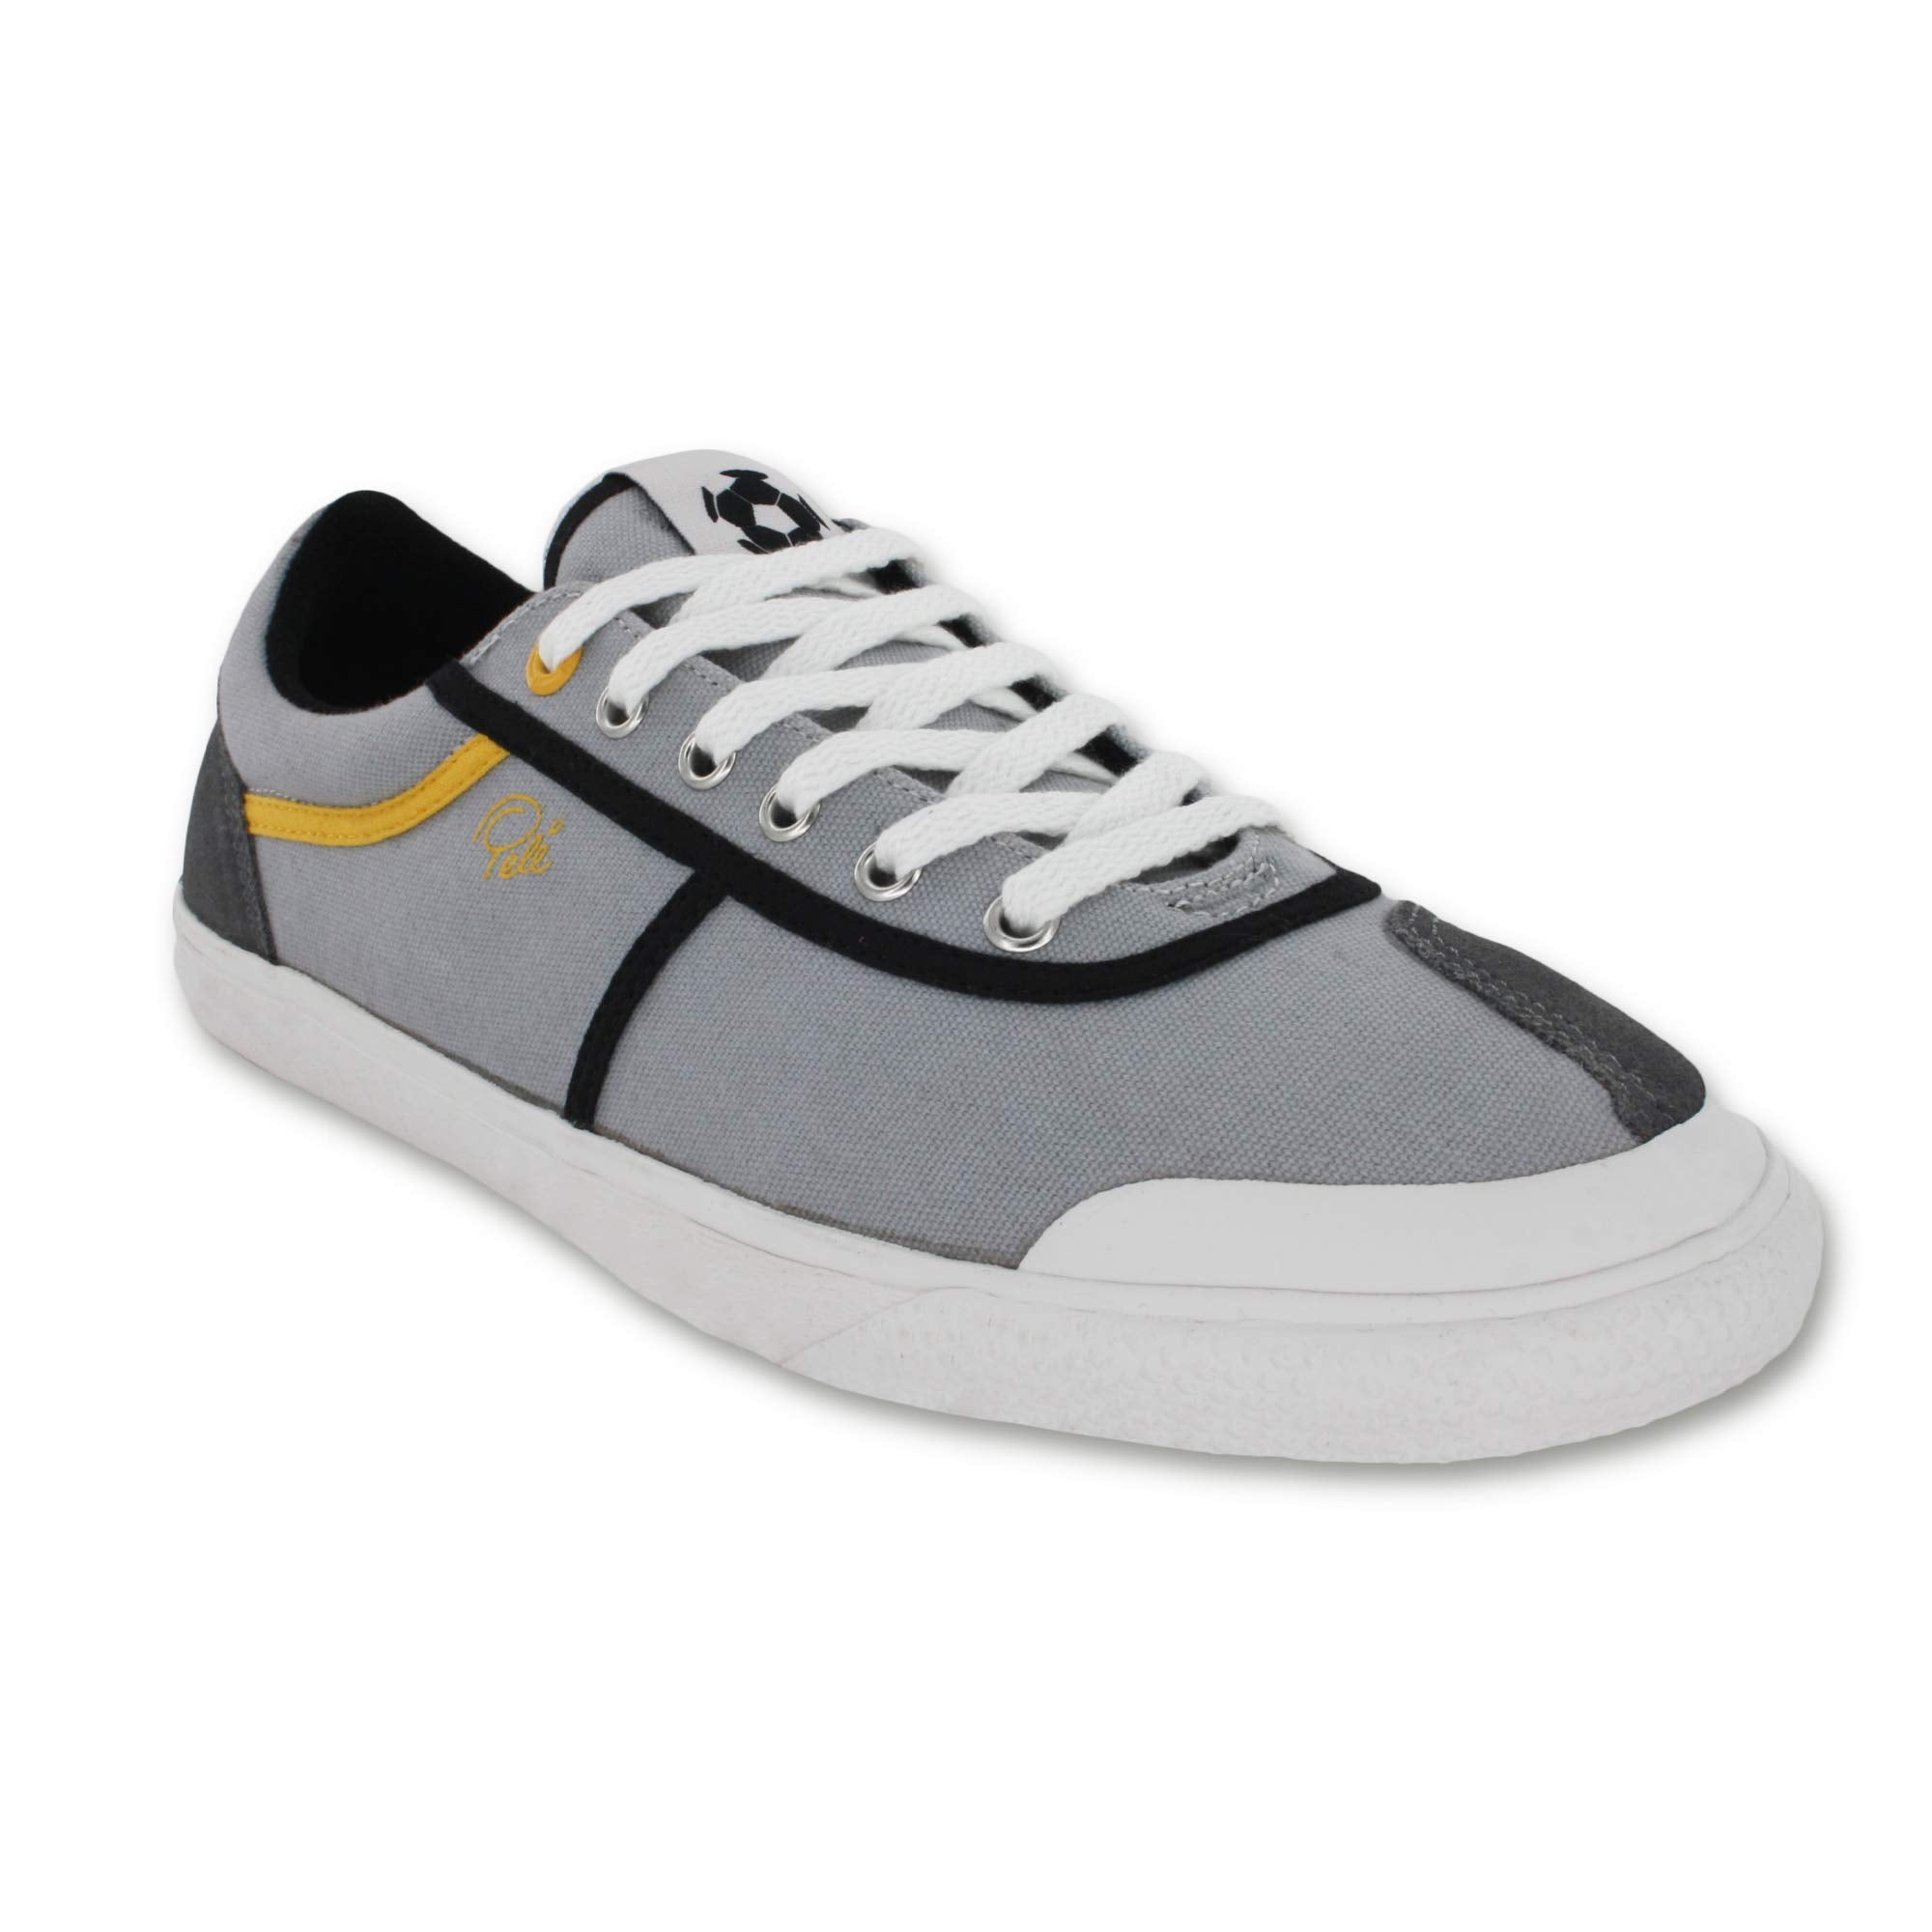 Pele Sports Men's Armador Canvas Sneakers - High Rise/Grey/White/Super Pink